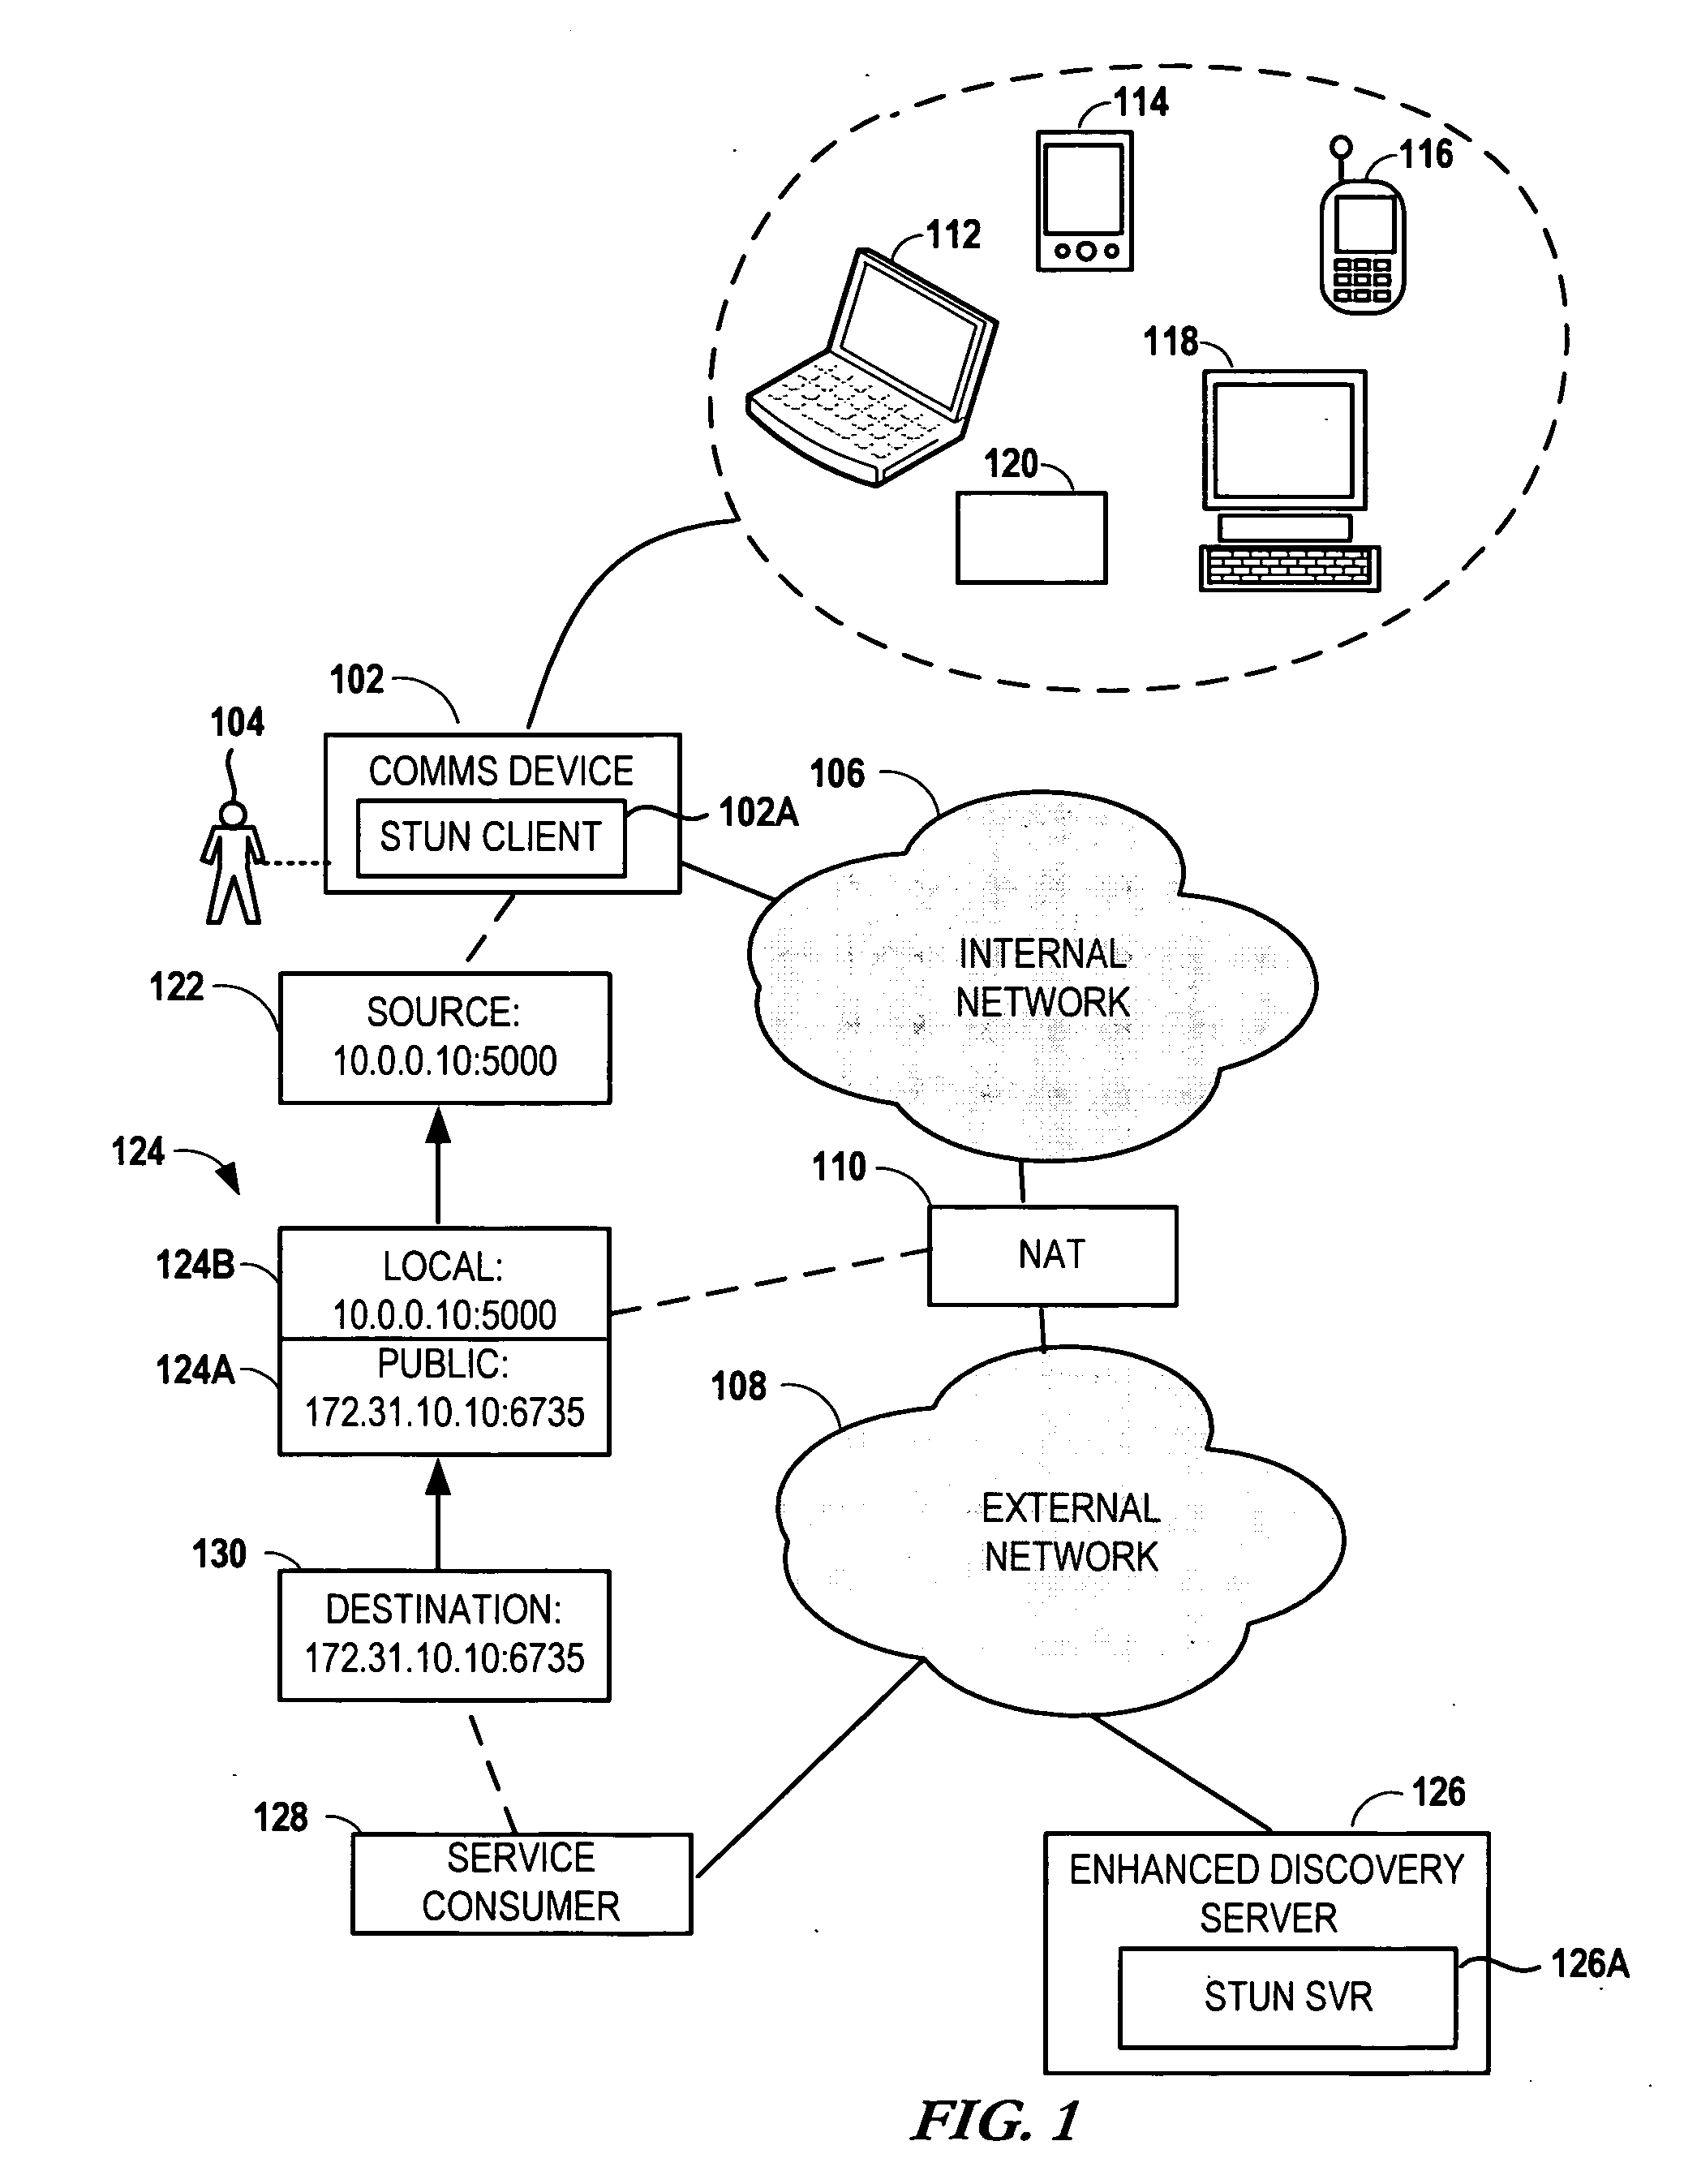 Dynamic discovery of a network service on a mobile device